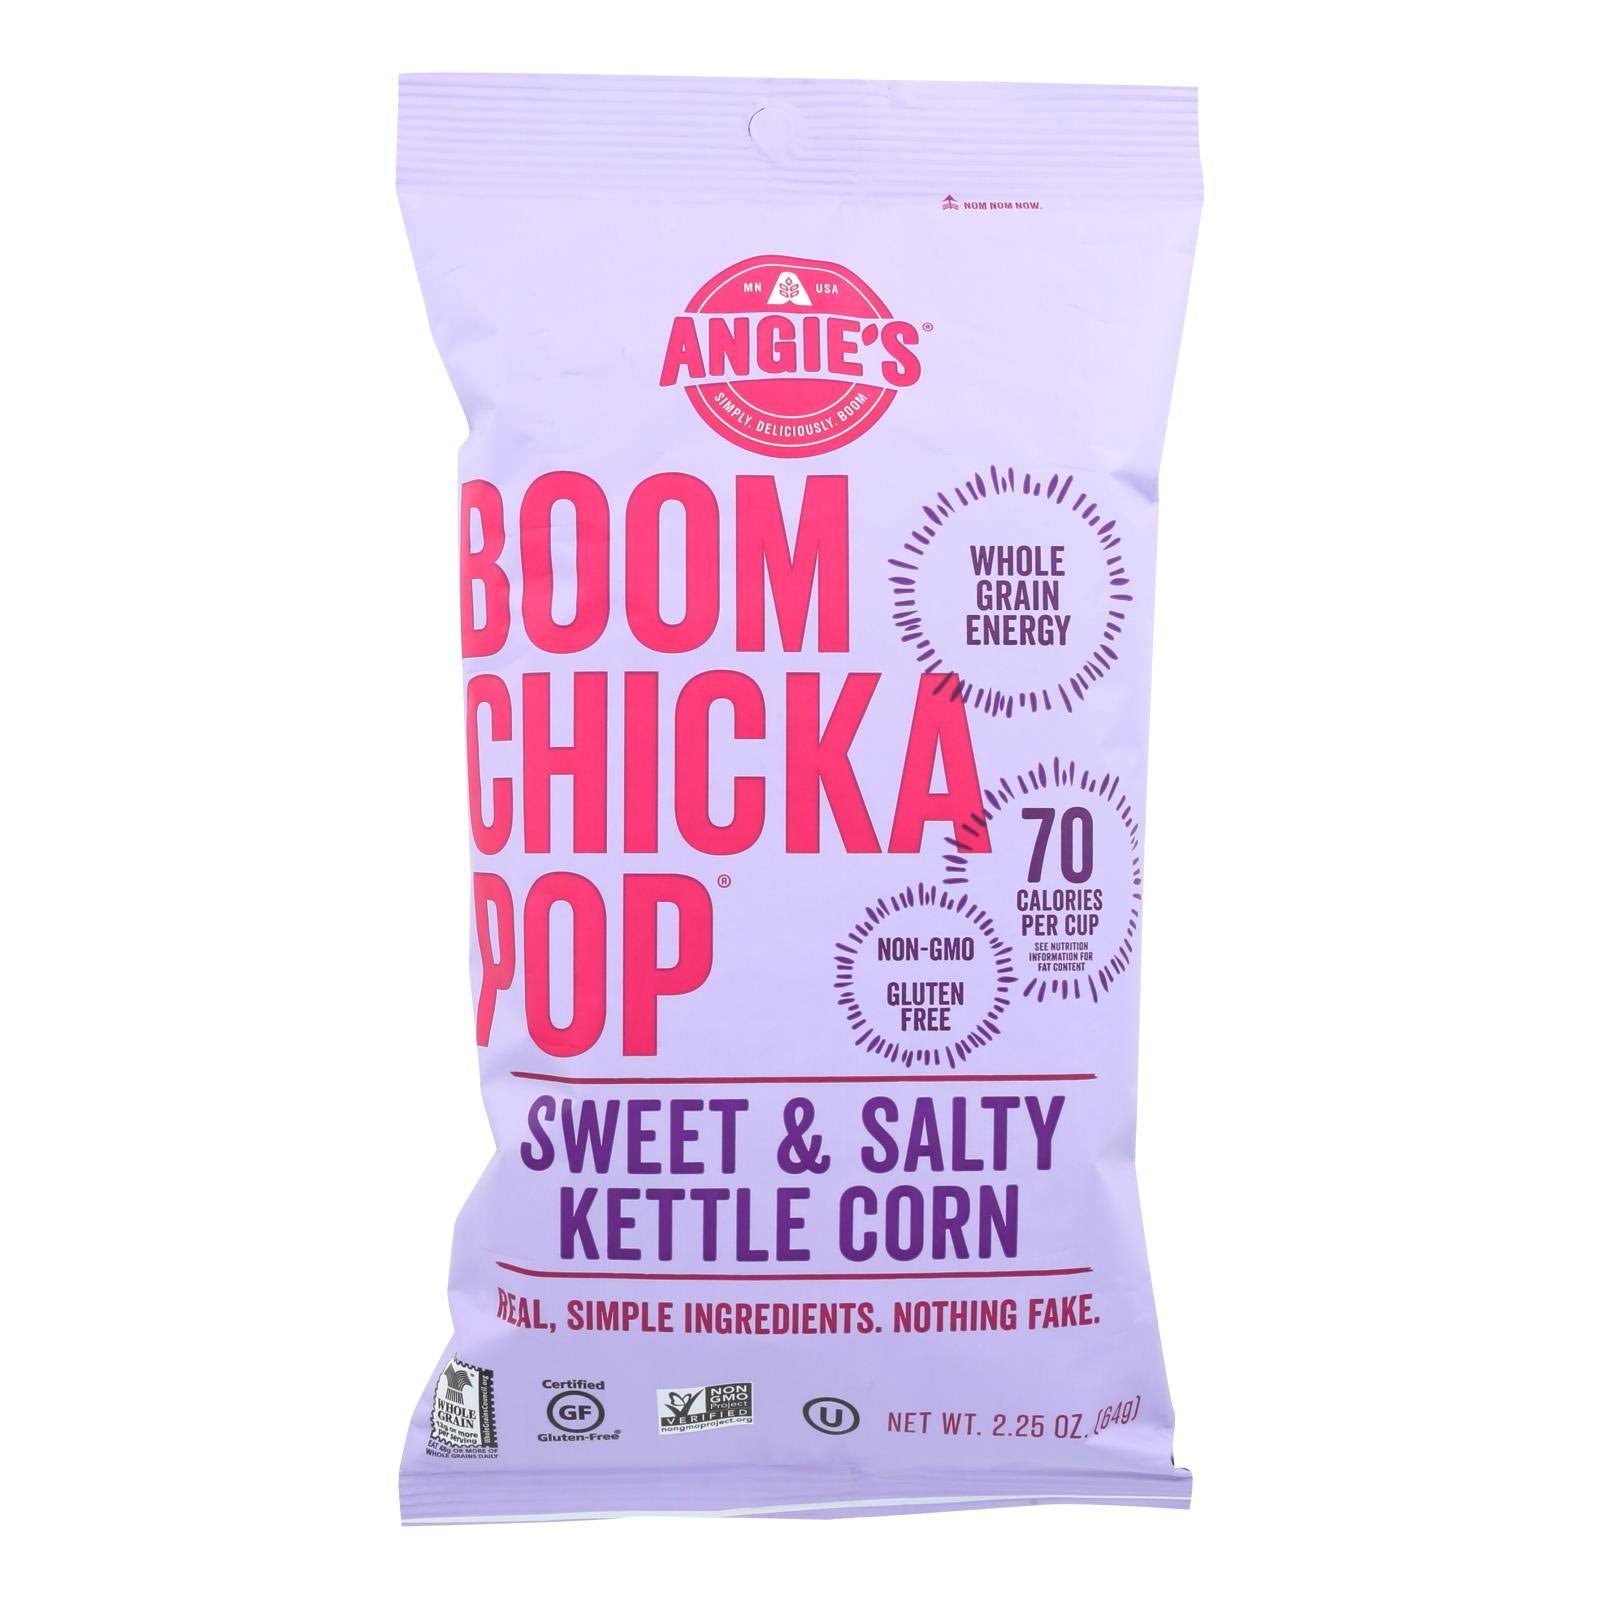 Angie's Kettle Corn Boom Chicka Pop Sweet and Salty Popcorn - Case of 12 - 2.25